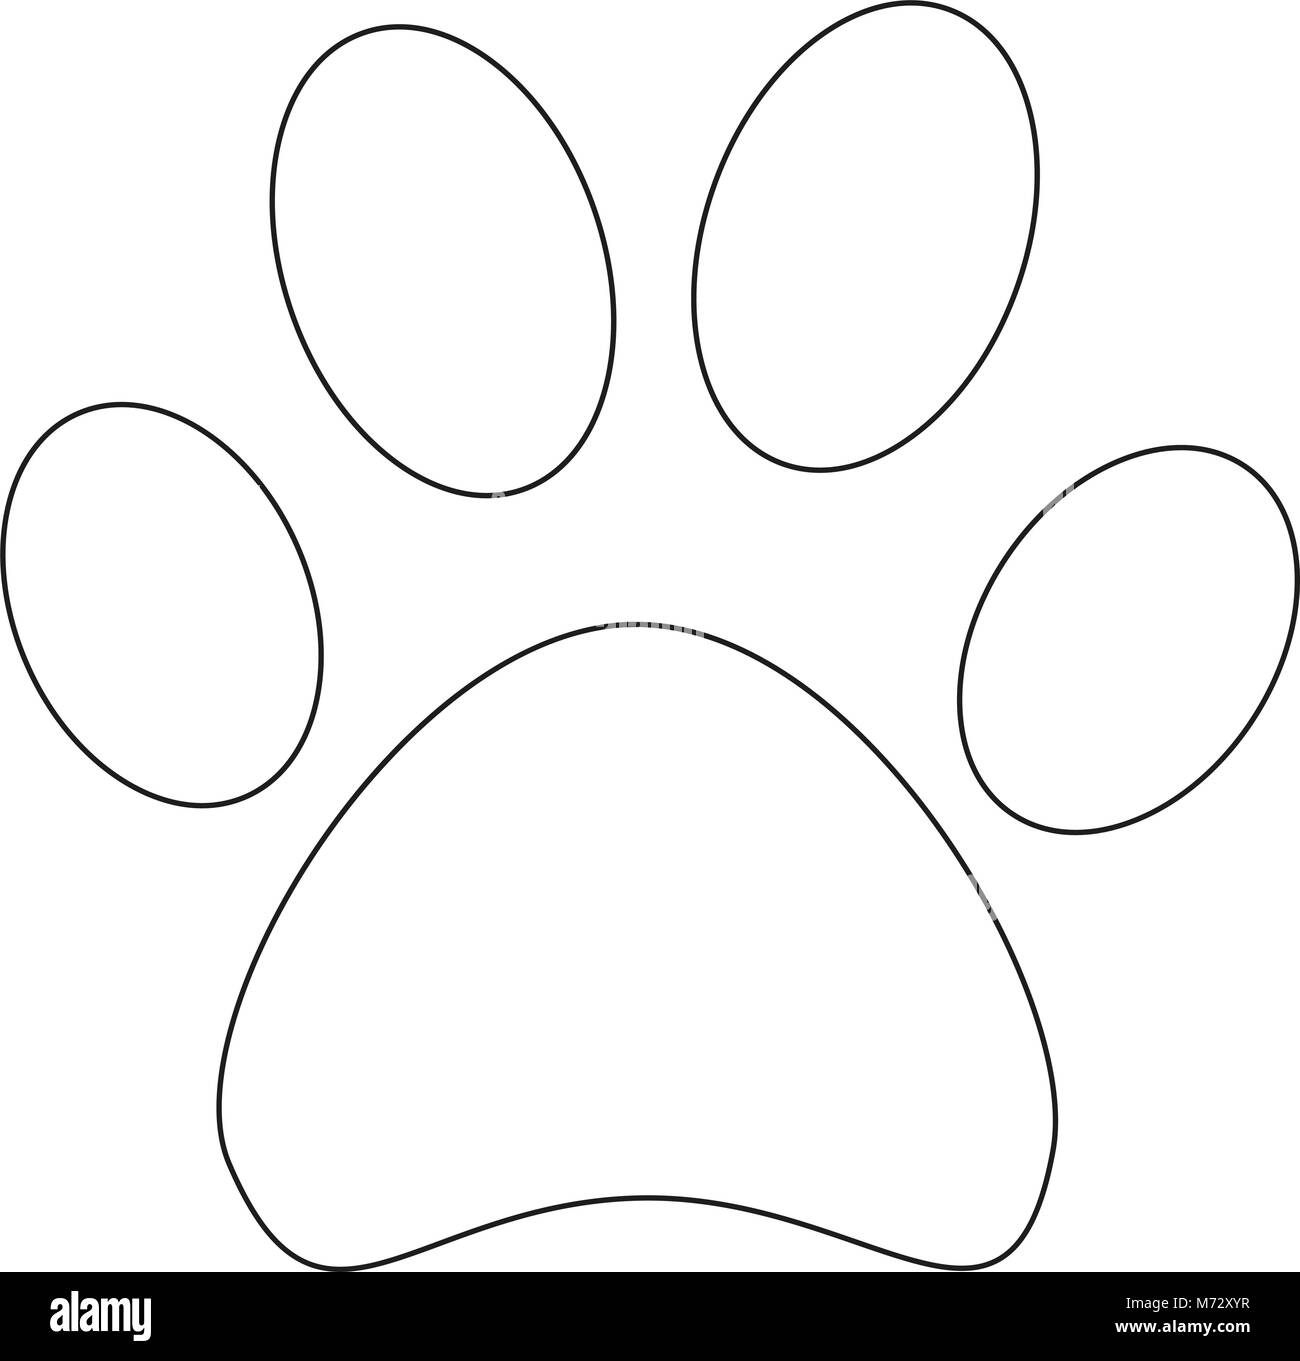 Line art cat paw footprint icon poster. Black and white vector illustration for gift card, flyer, certificate or banner, icon, logo, patch, sticker Stock Vector